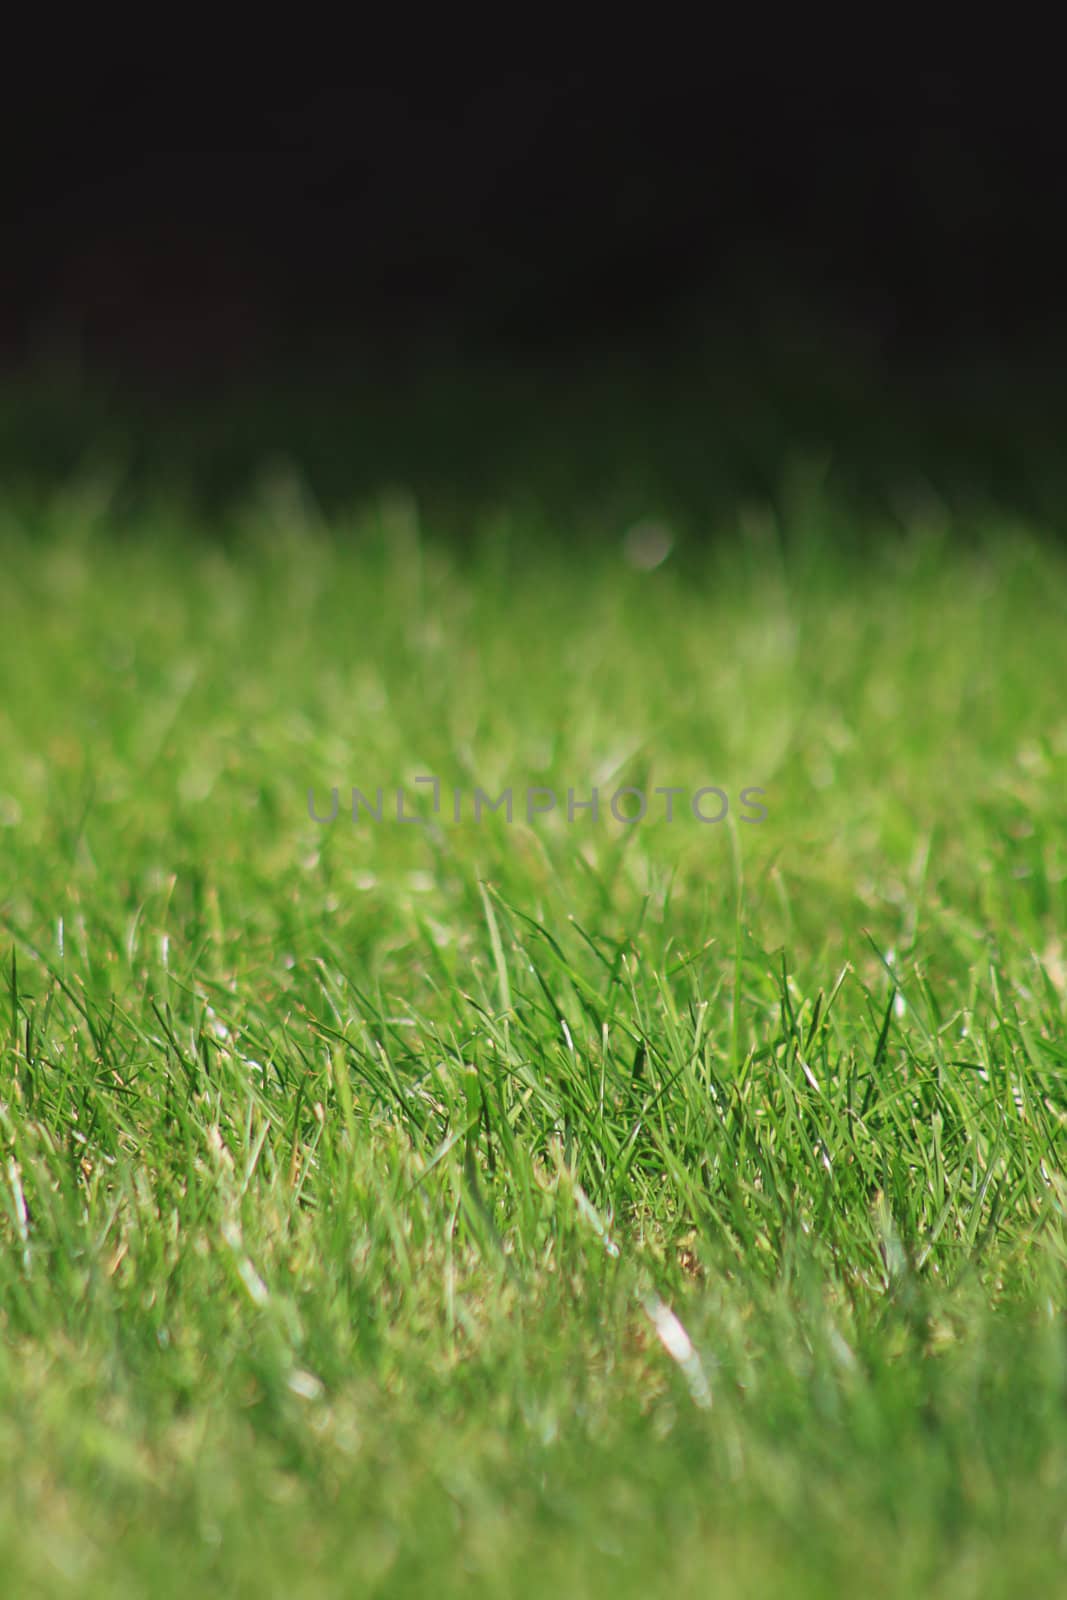 A portrait format image of green grass. Focus on middle distance of image. Room for copy above or below image.